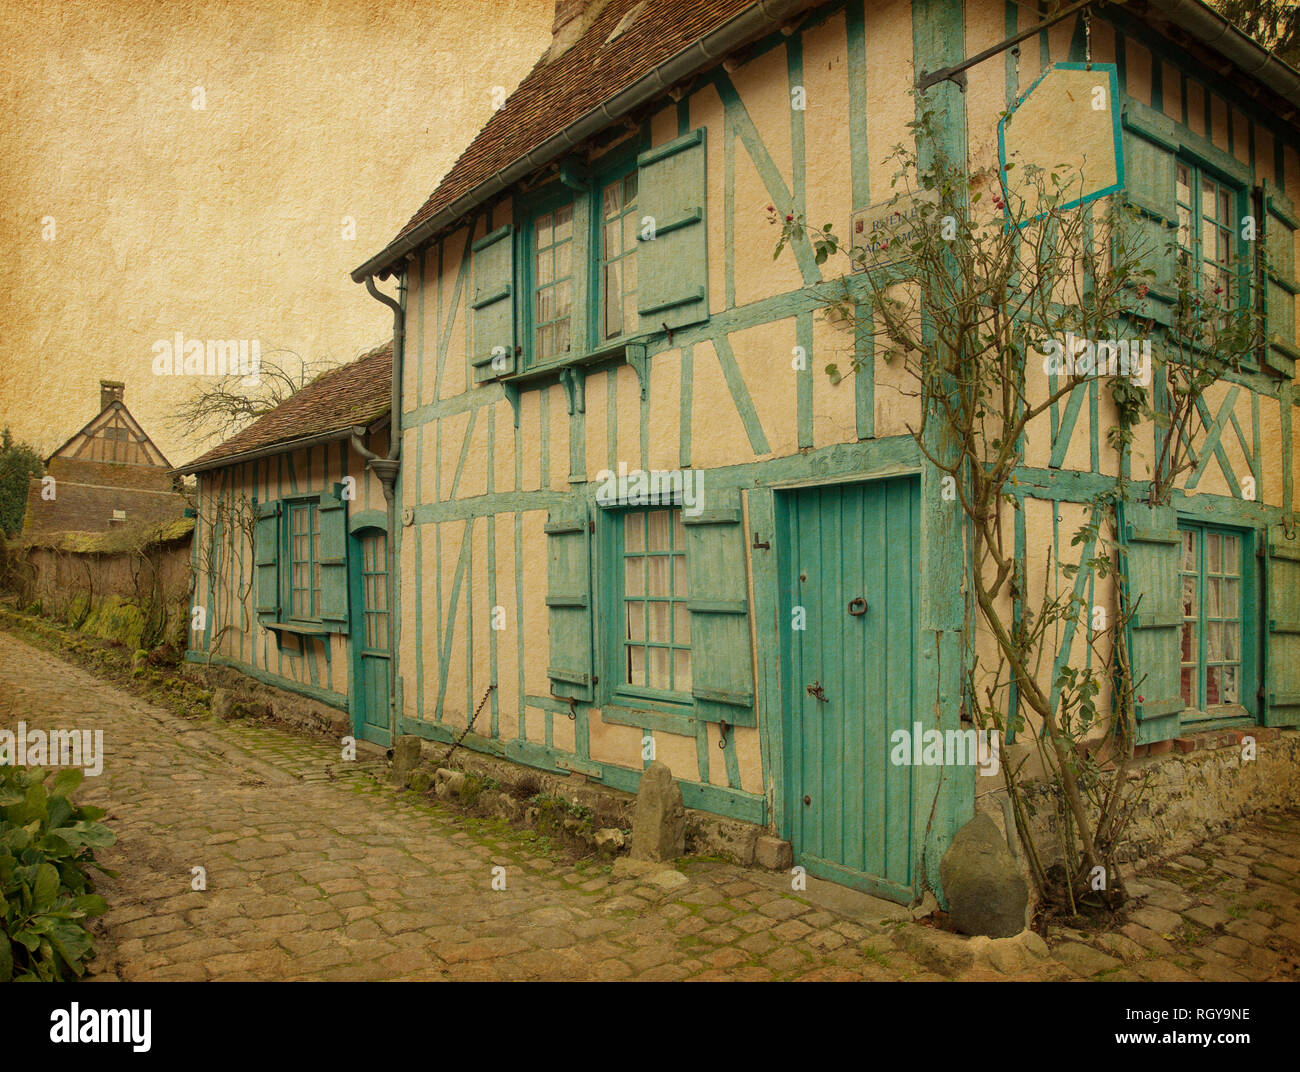 Gerberoy.  Old house in medieval village. Gerberoy is a commune in the Oise department in northern France.  Photo in retro style. Paper texture. Stock Photo